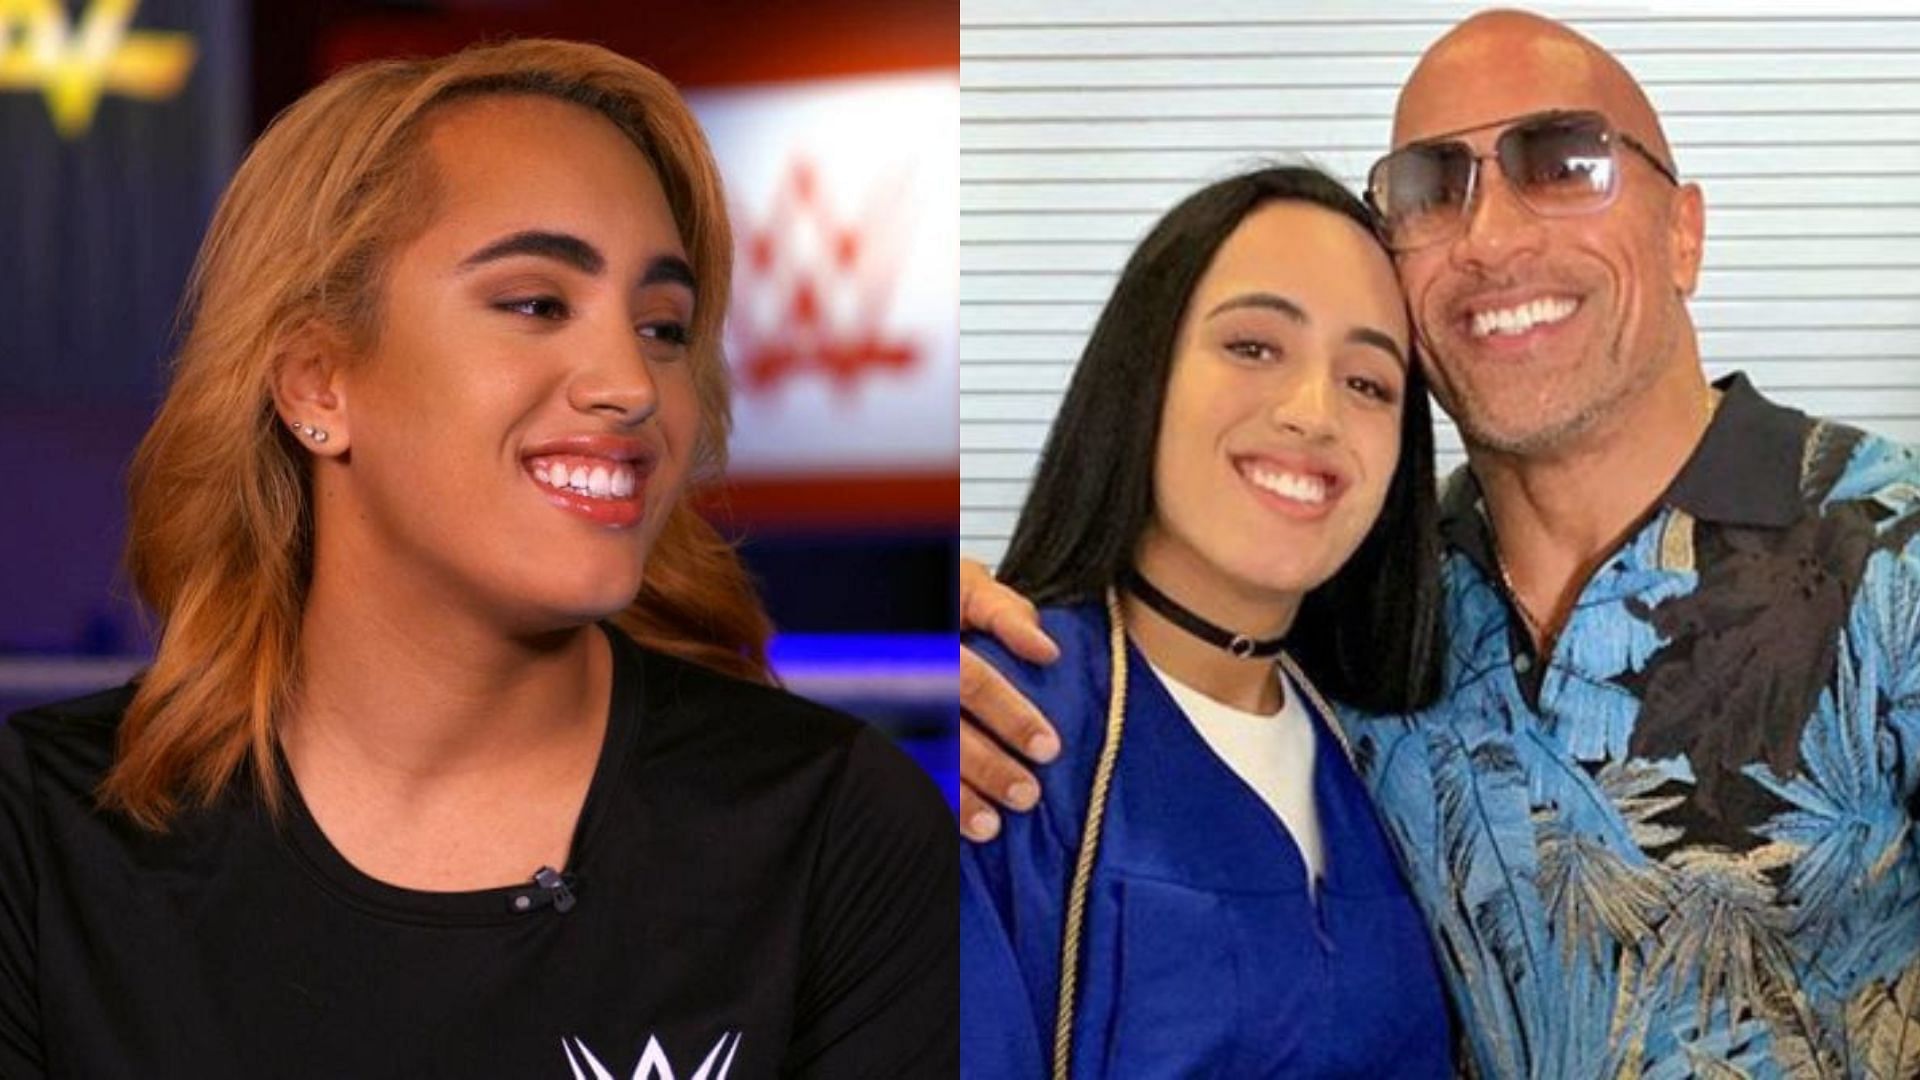 Did The Rock train his daughter Simone Johnson before her WWE debut?